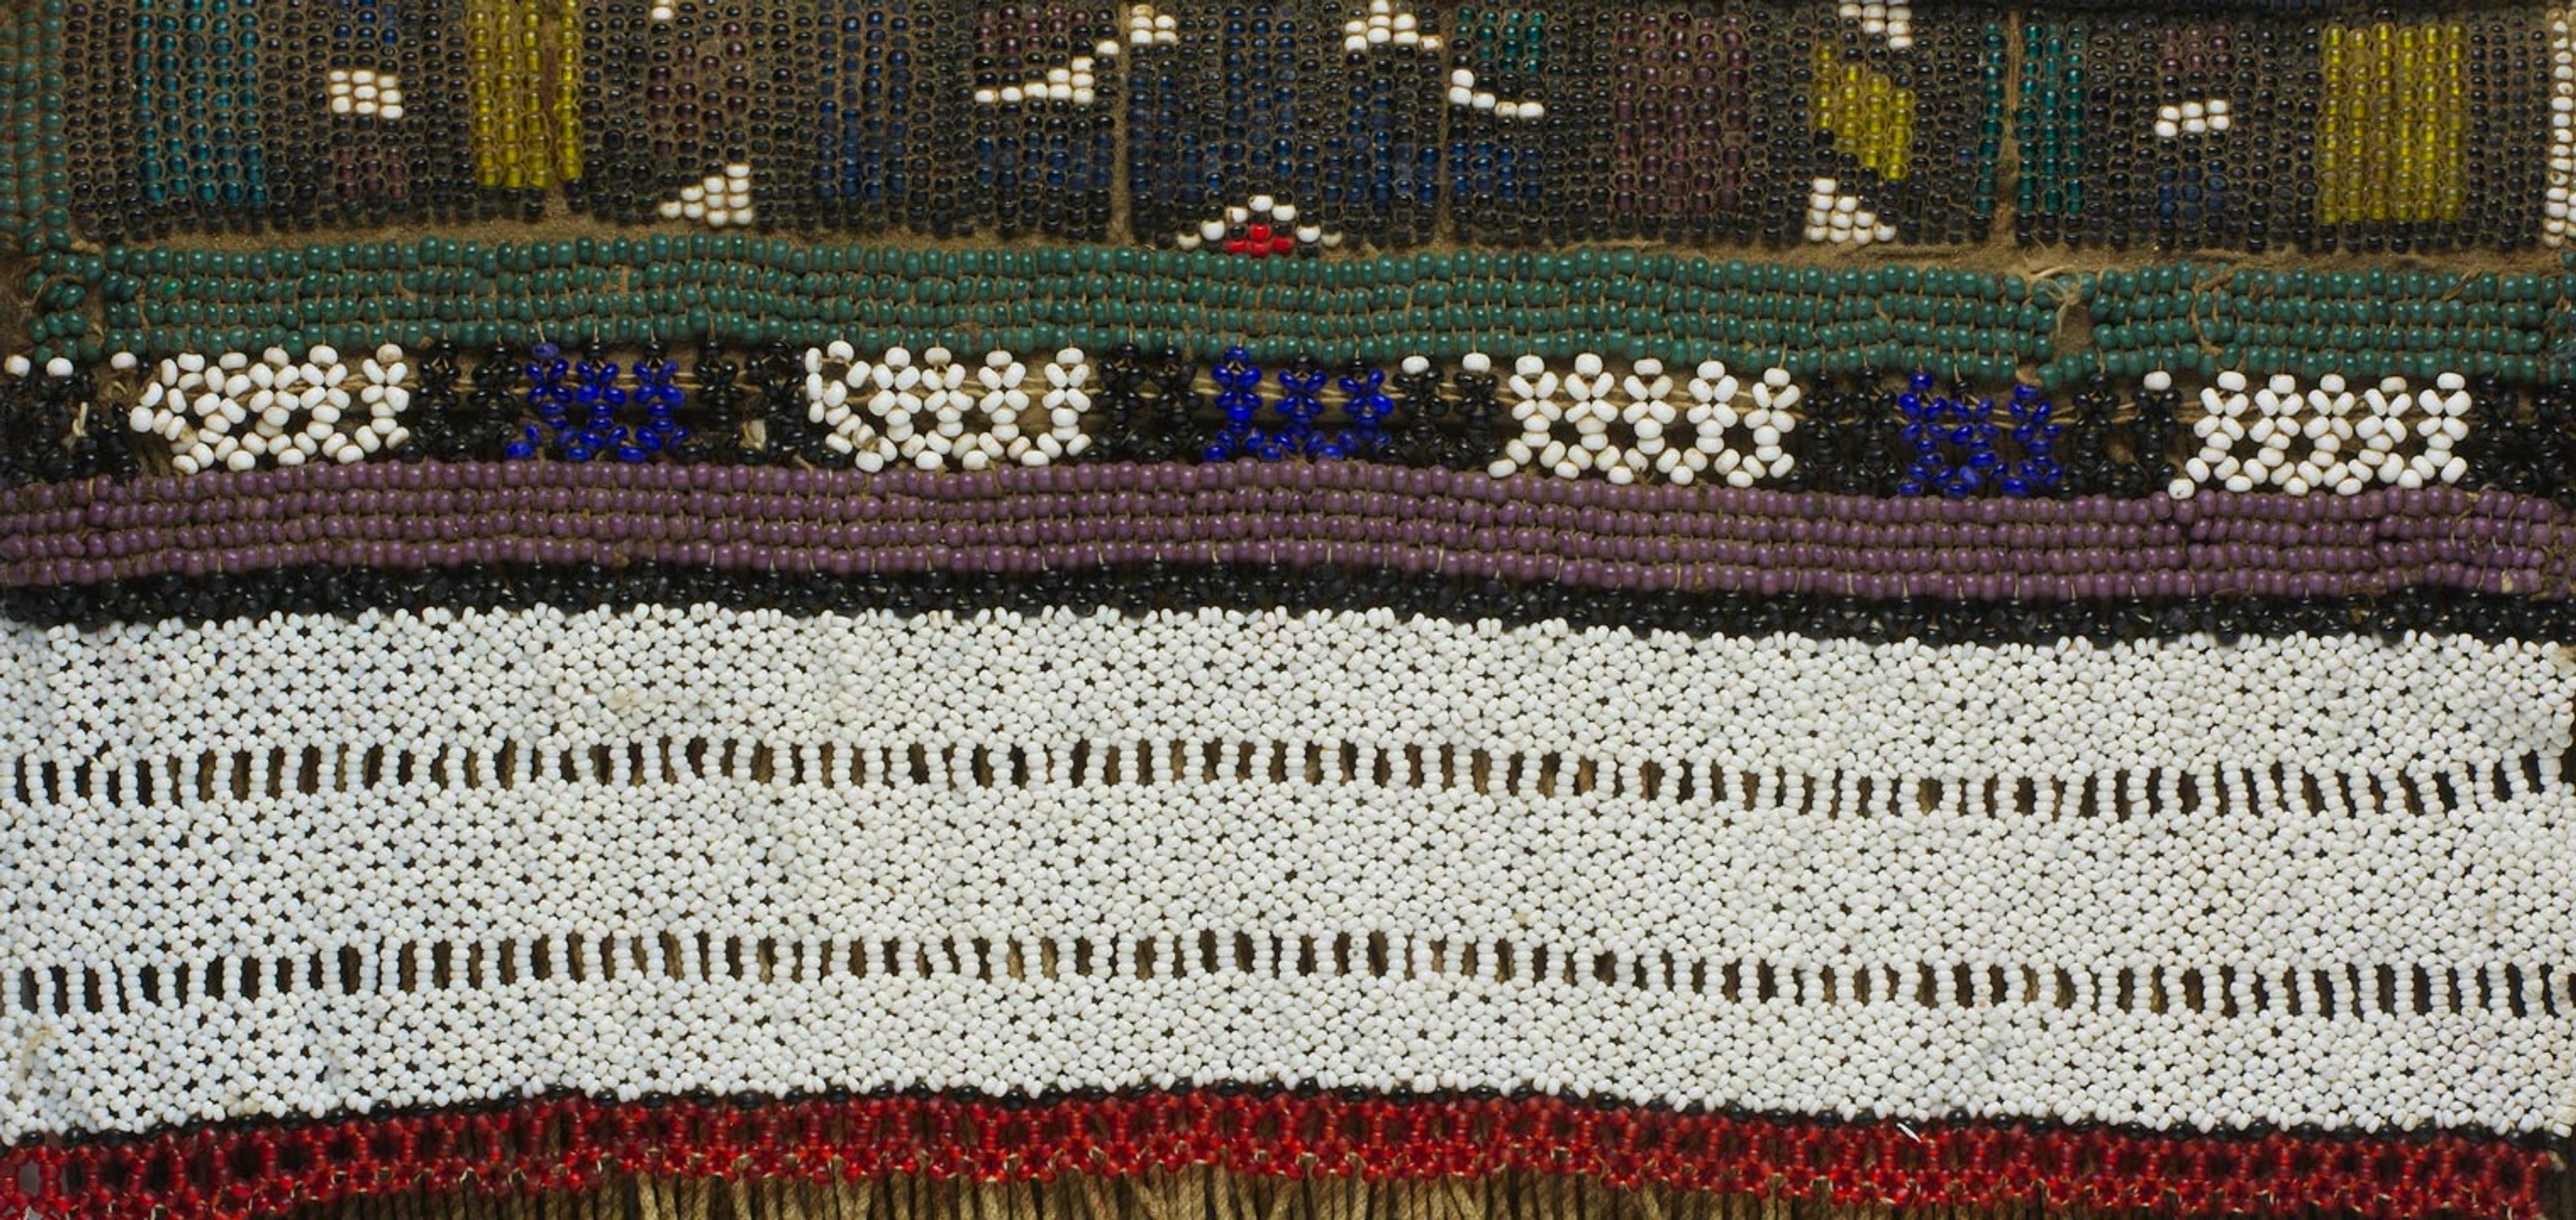 Detail view of a girl's apron made glass beads and hide